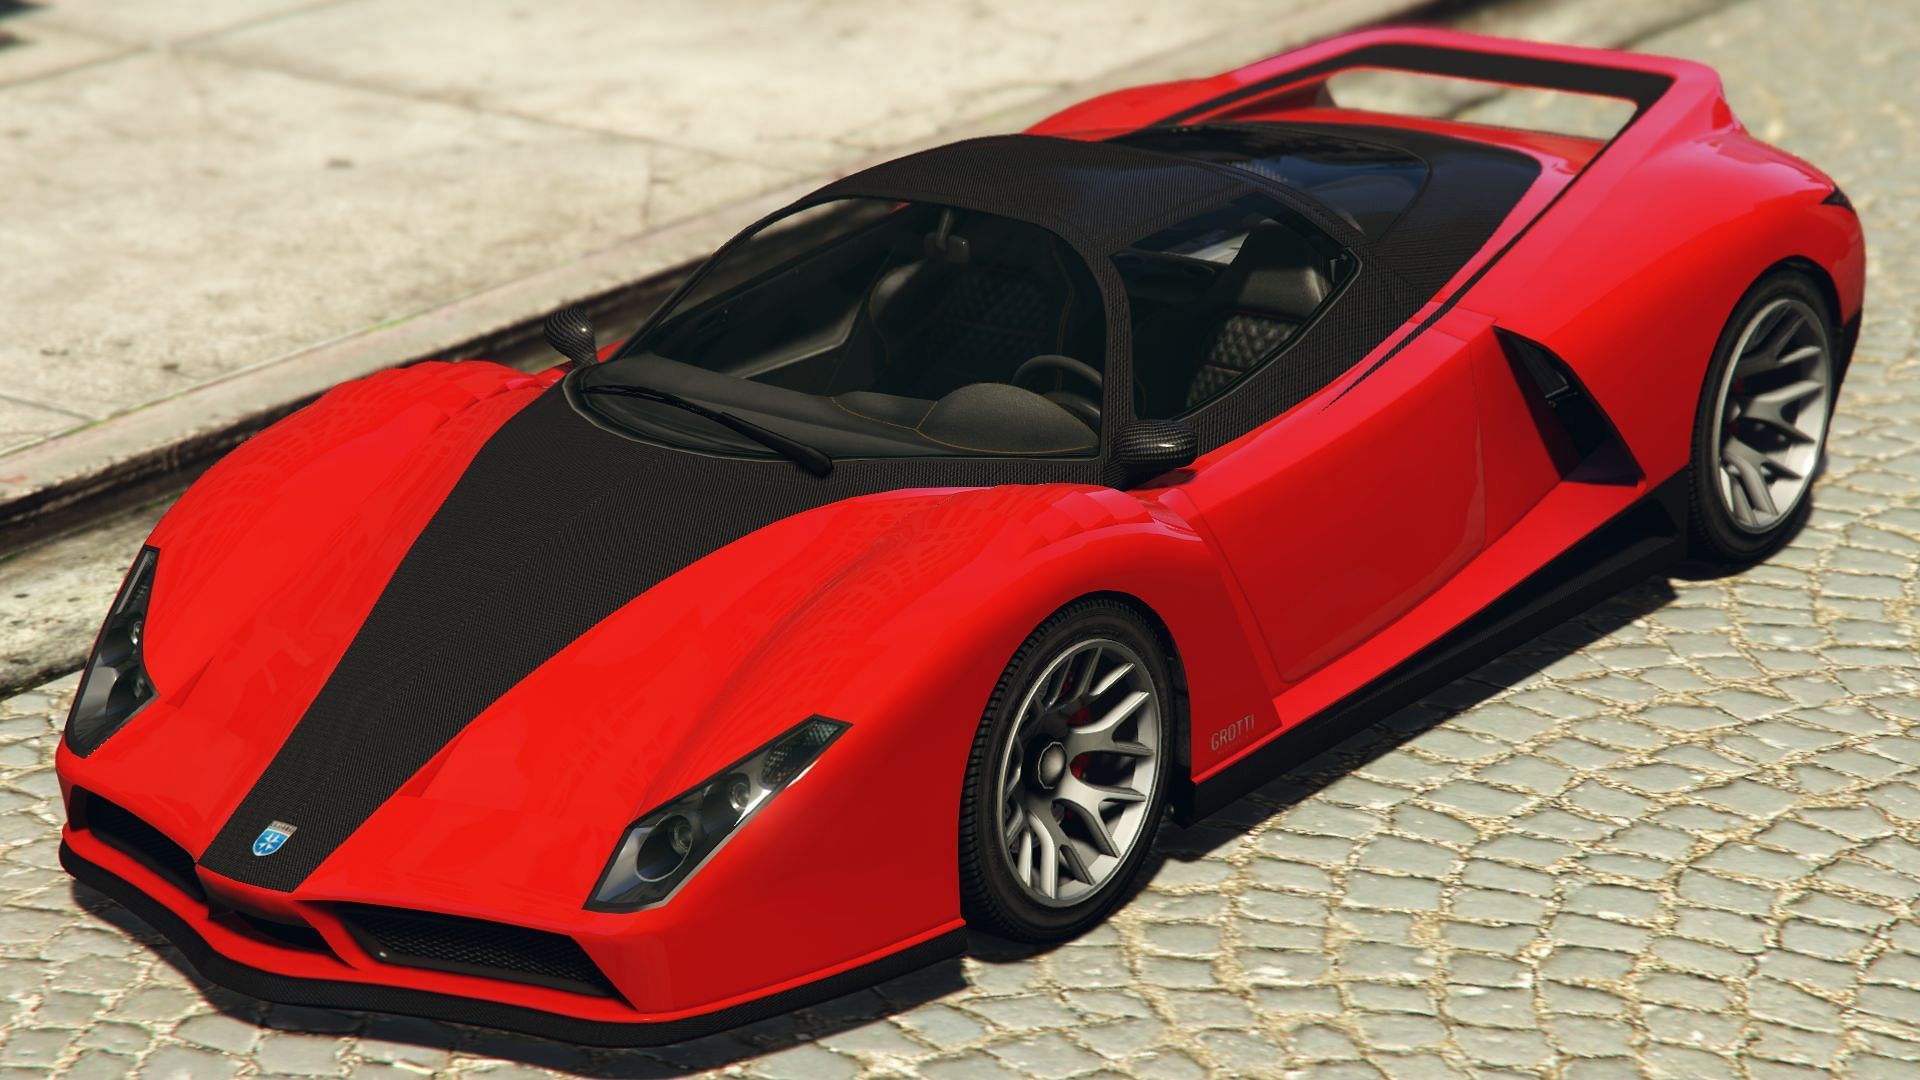 The iconic Cheetah is gone from Legendary Motorsport in GTA Online (Image via Rockstar Games)